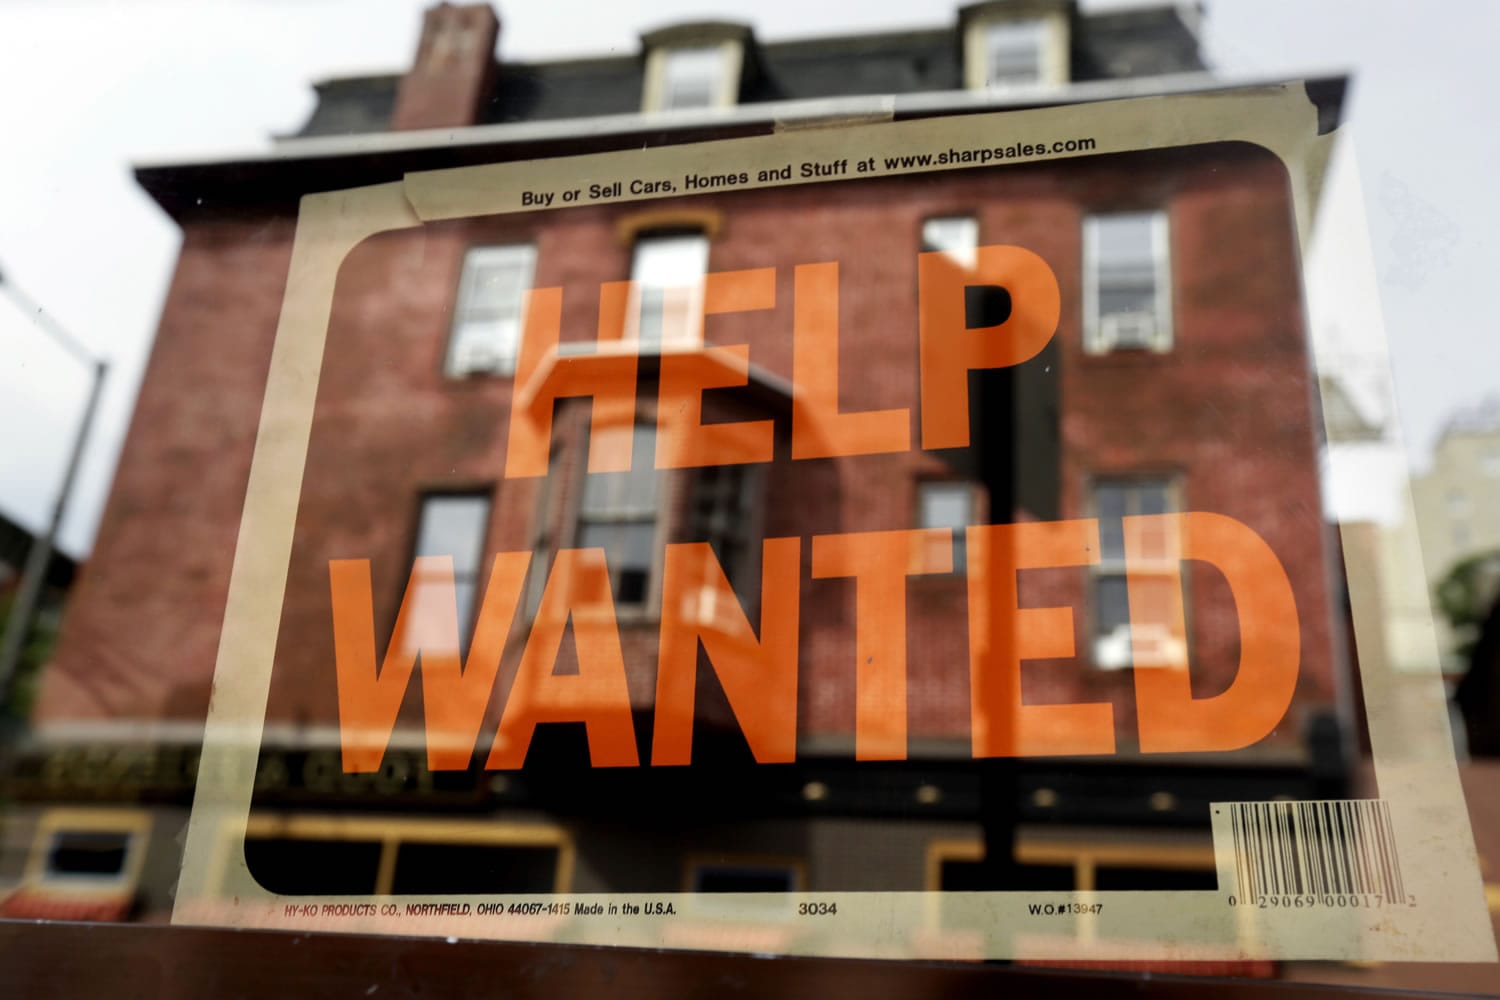 A Philadelphia business displays a help wanted sign in its storefront in August 2013.